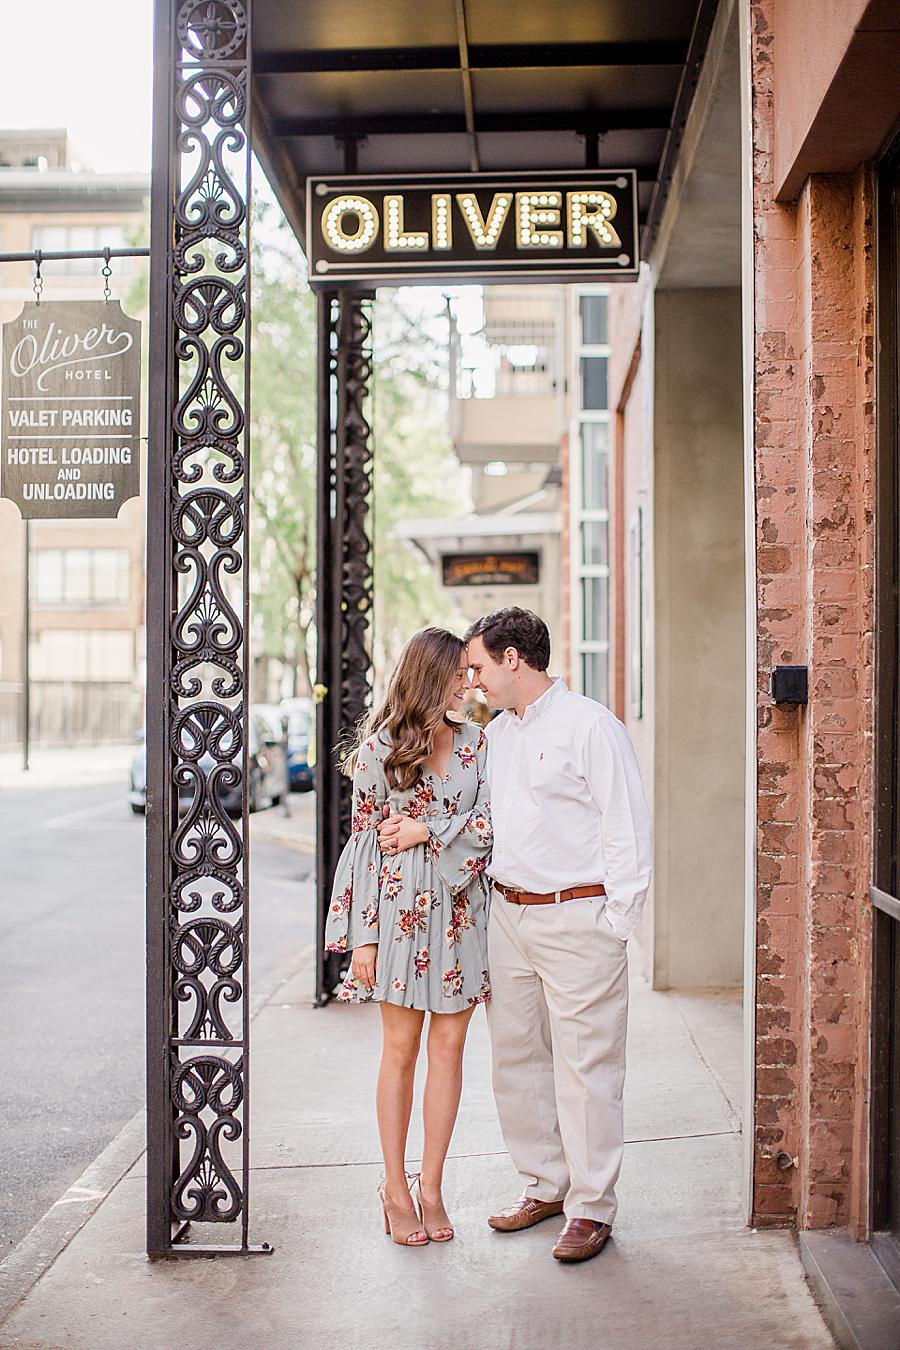 The Oliver Hotel at this Meads Quarry Session by Knoxville Wedding Photographer, Amanda May Photos.